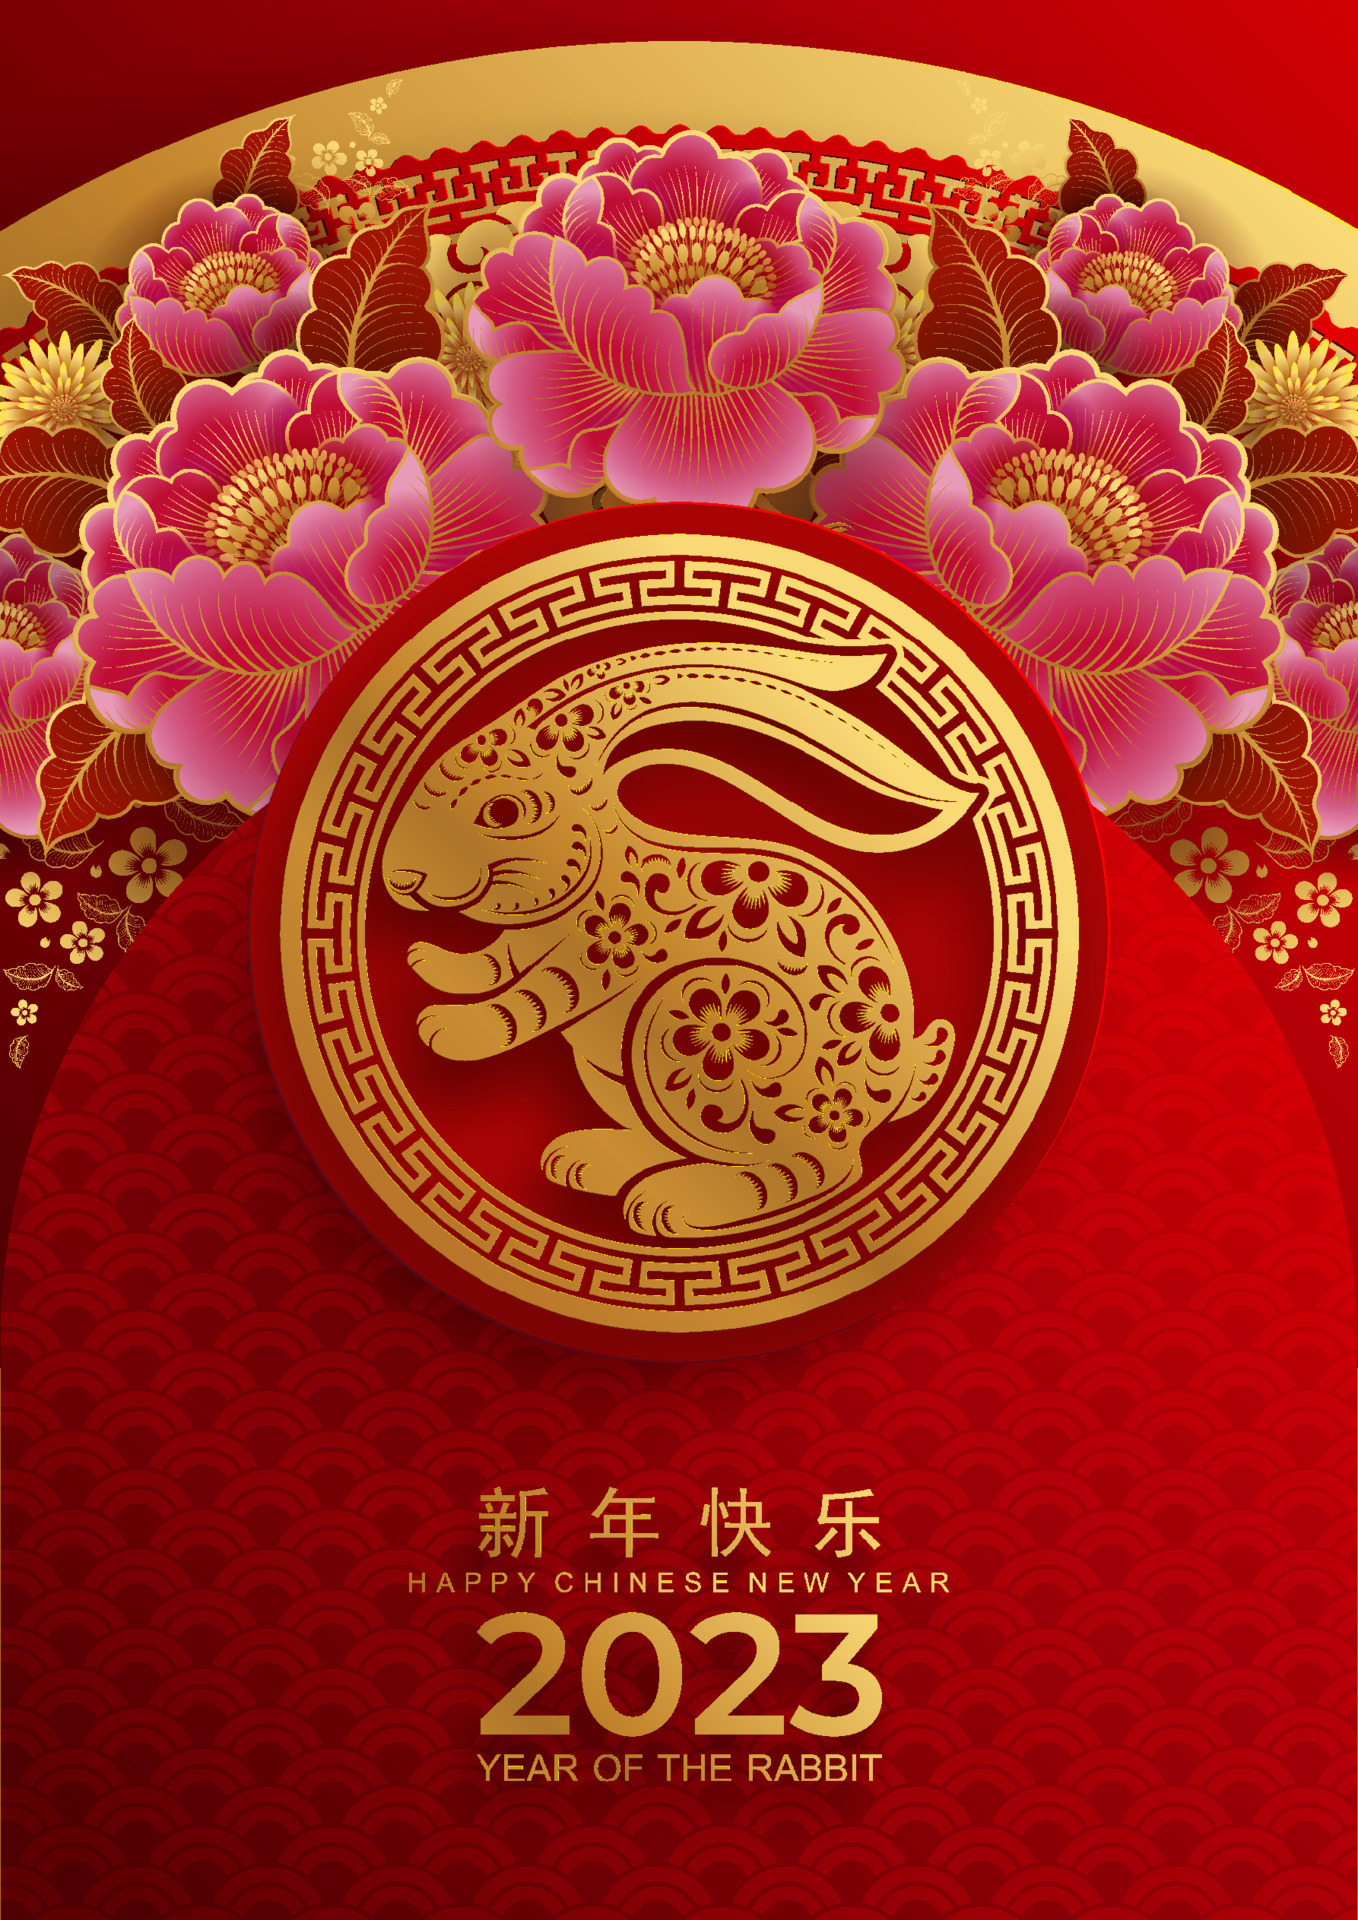 2023 Lunar New Year Wallpapers - Wallpaper Cave